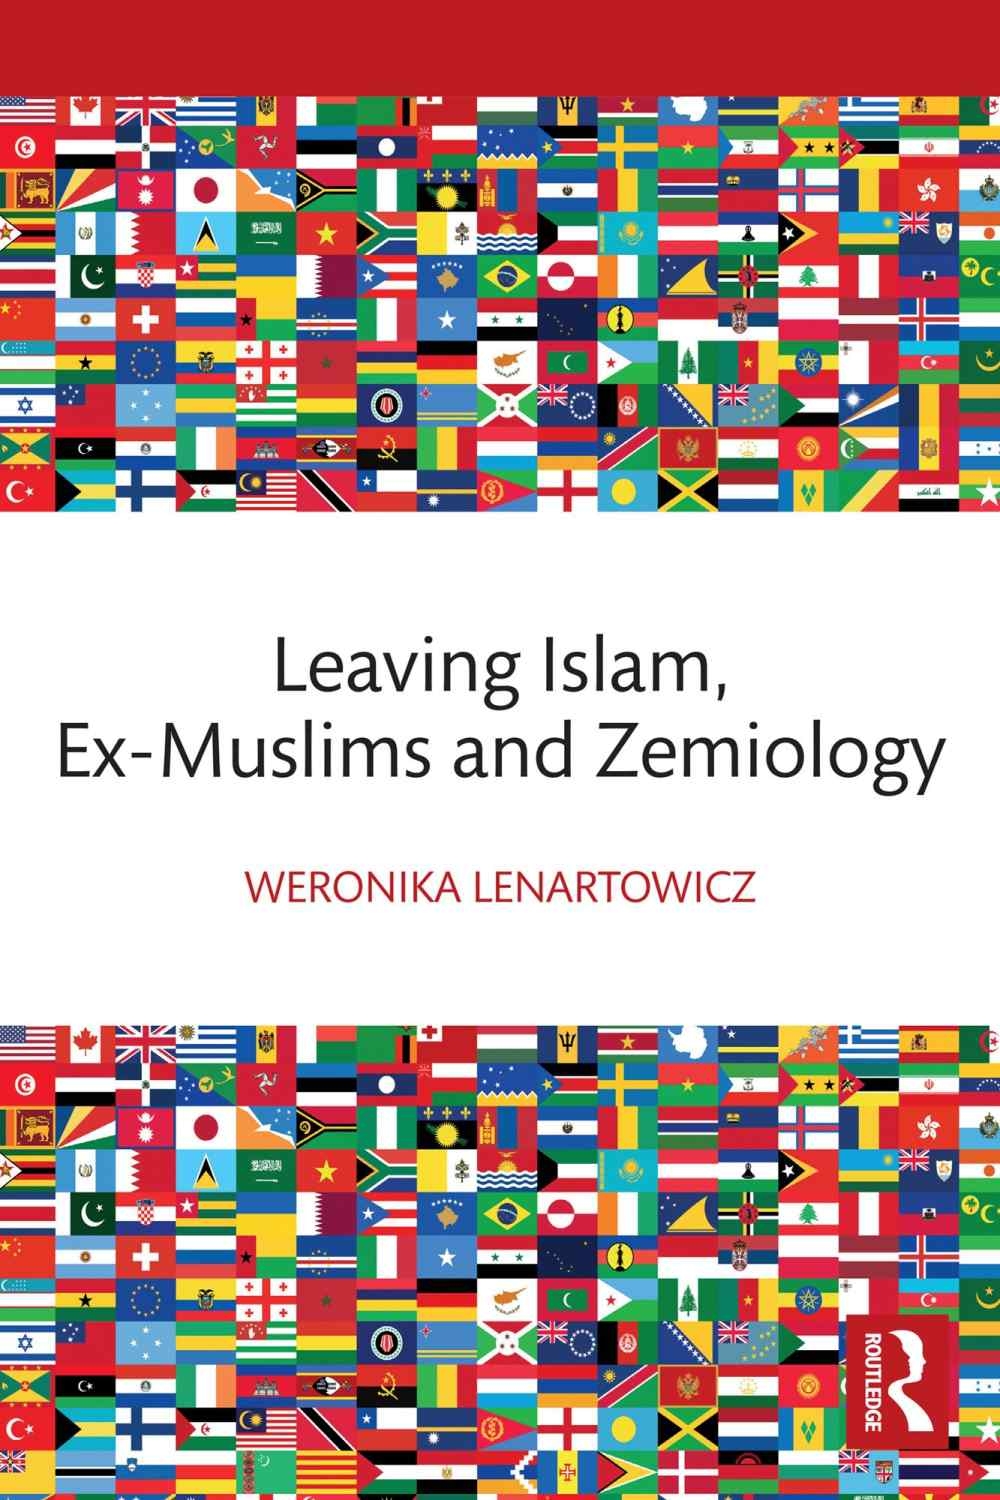 Leaving Islam: Ex-Muslims and Zemiology